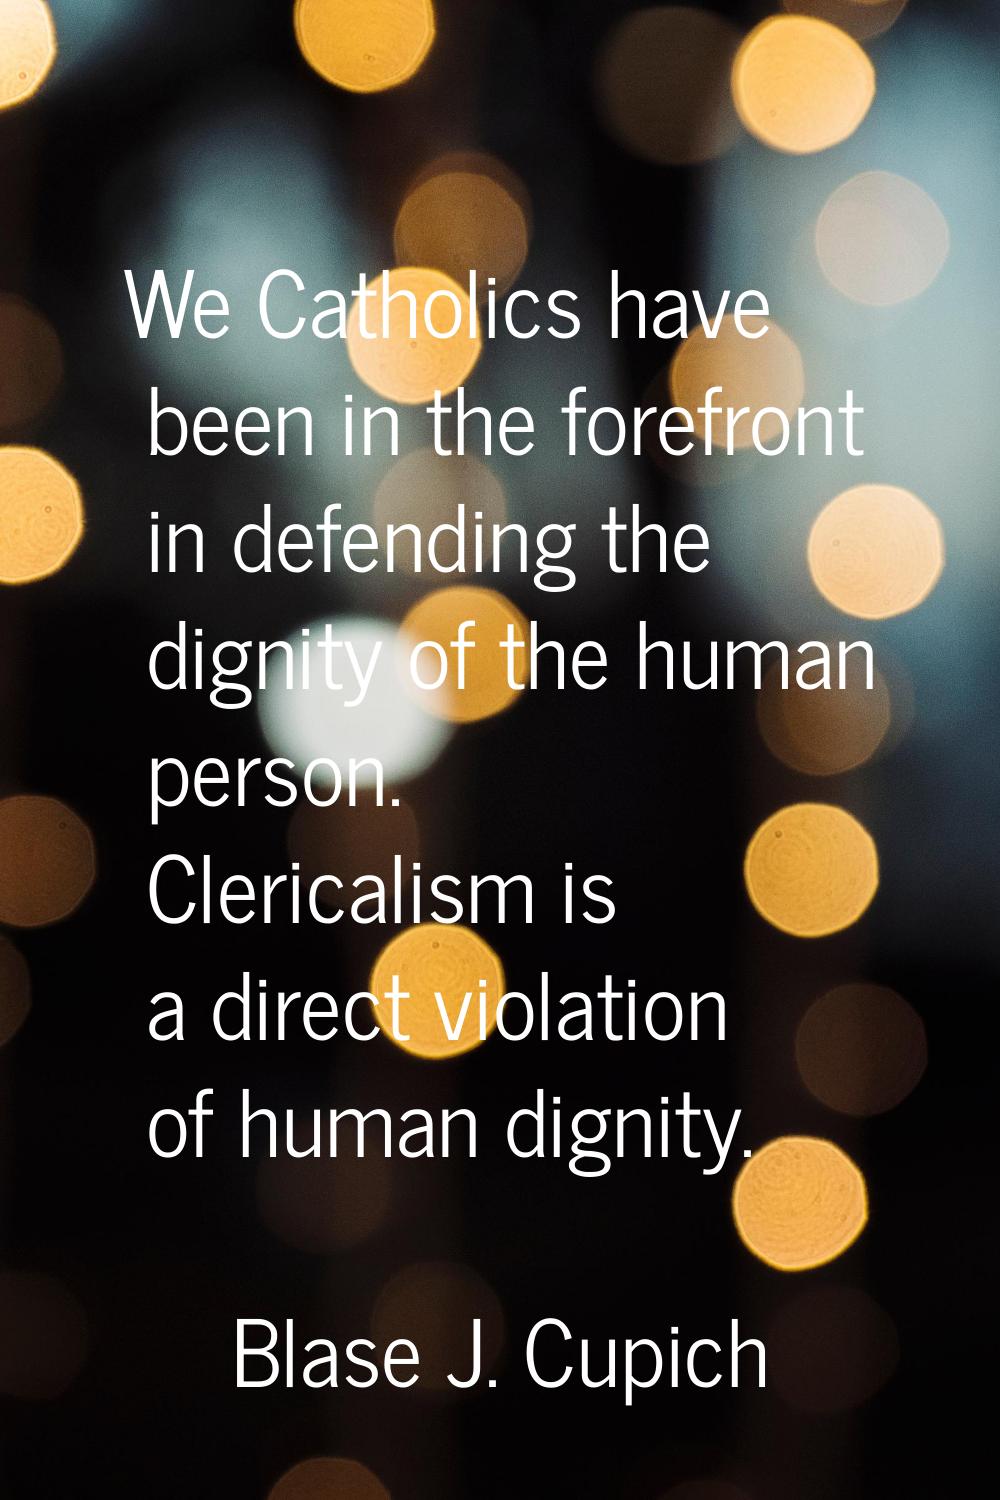 We Catholics have been in the forefront in defending the dignity of the human person. Clericalism i